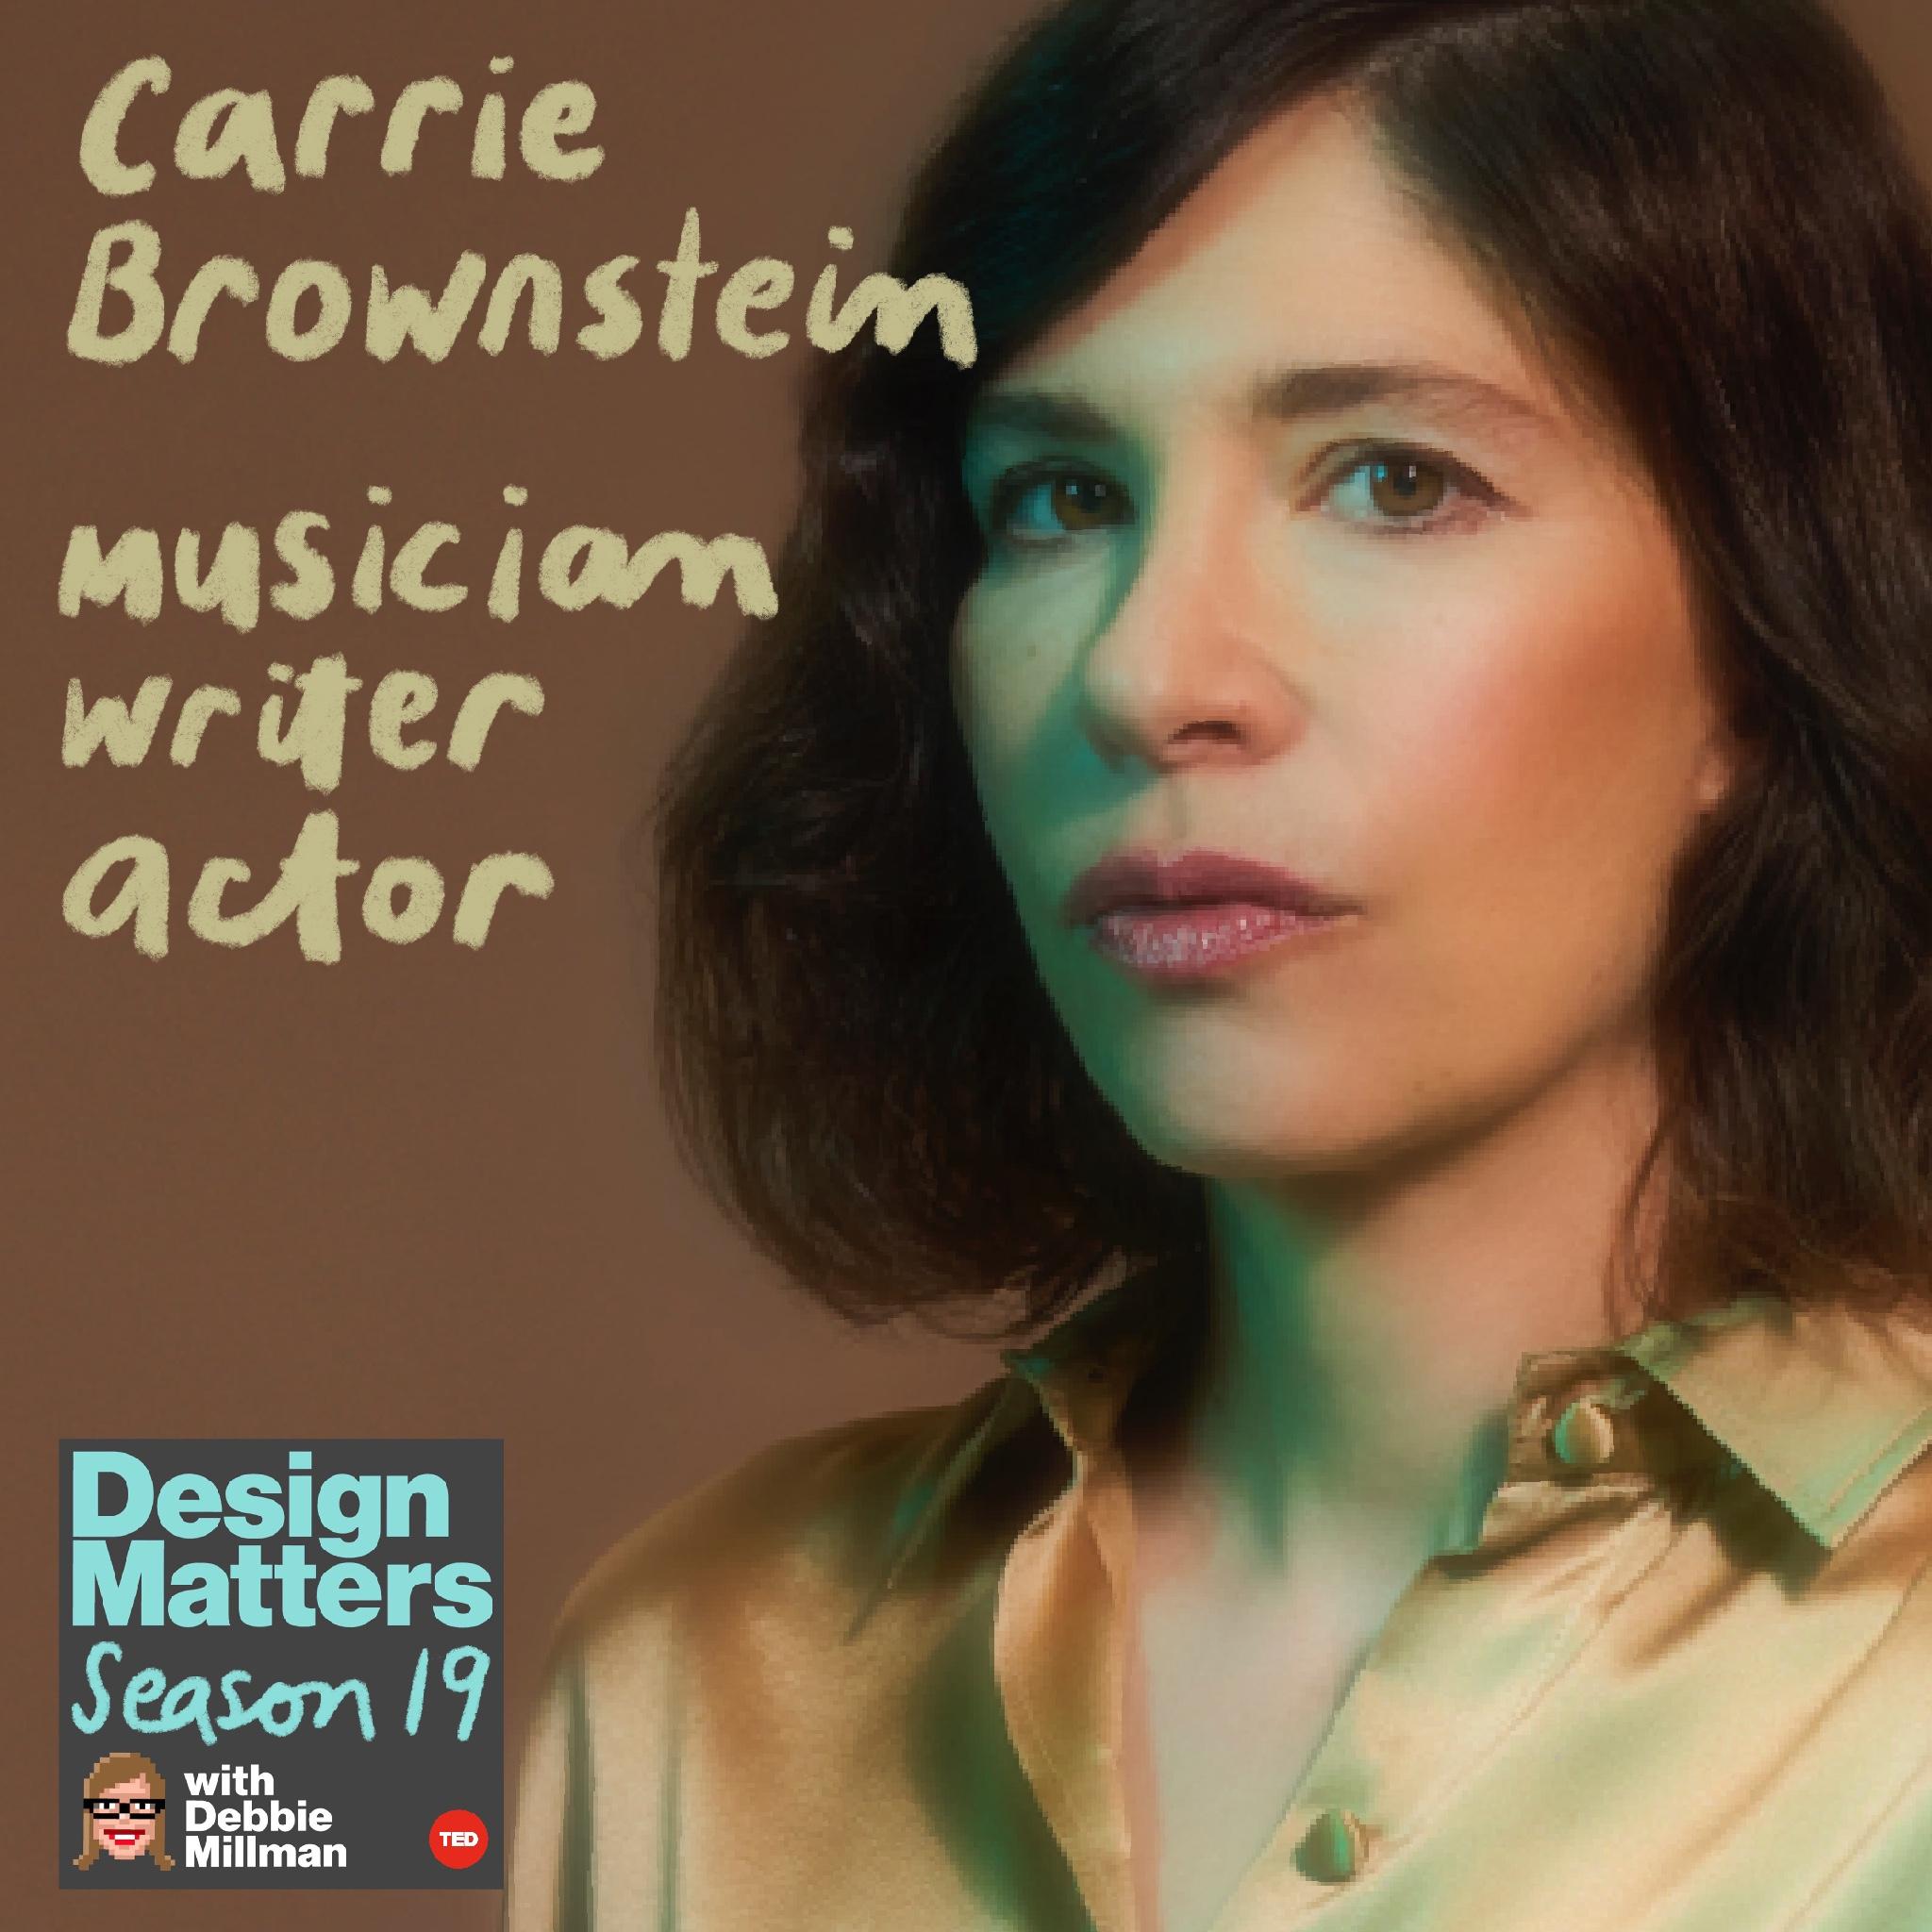 Thumbnail for "Carrie Brownstein".